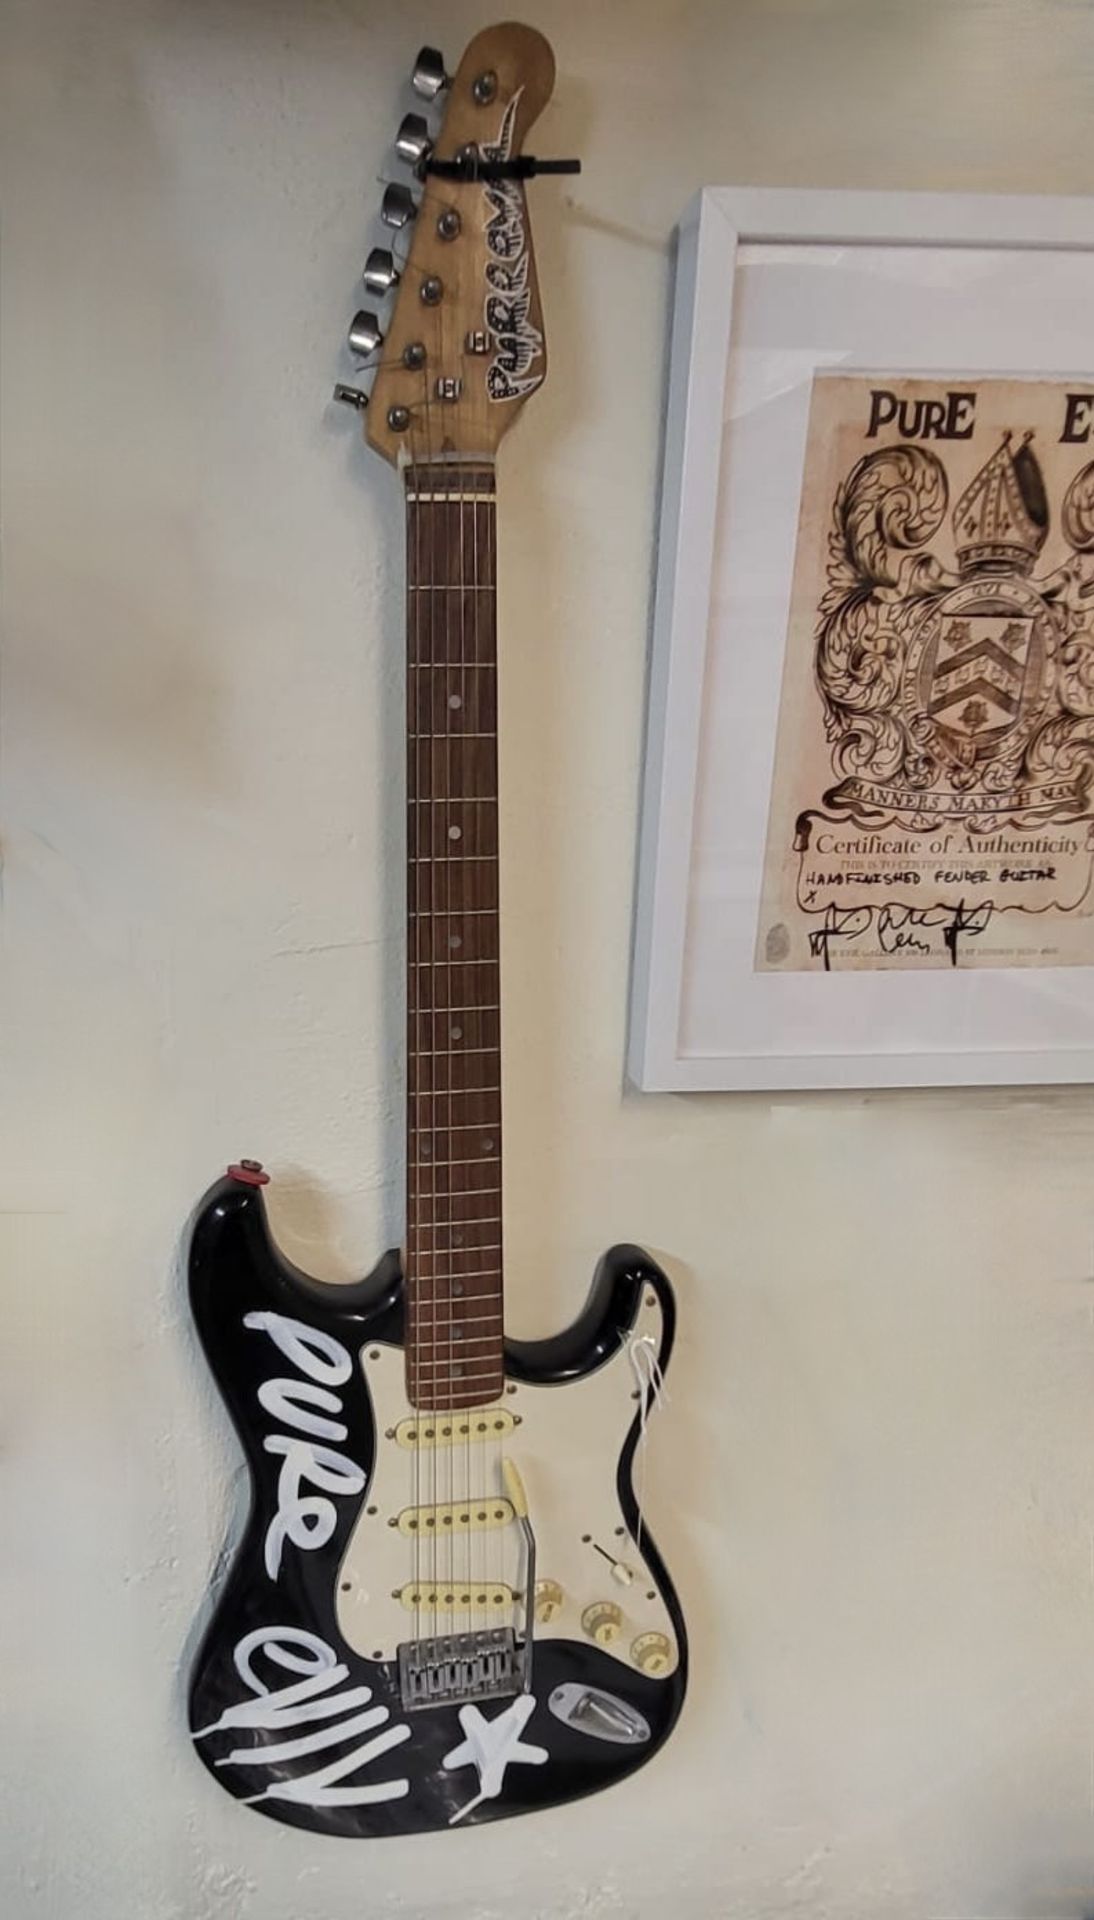 Simply Incredible ONE OFF MULTI-SIGNED Fender Style Guitar by PURE EVIL with COA